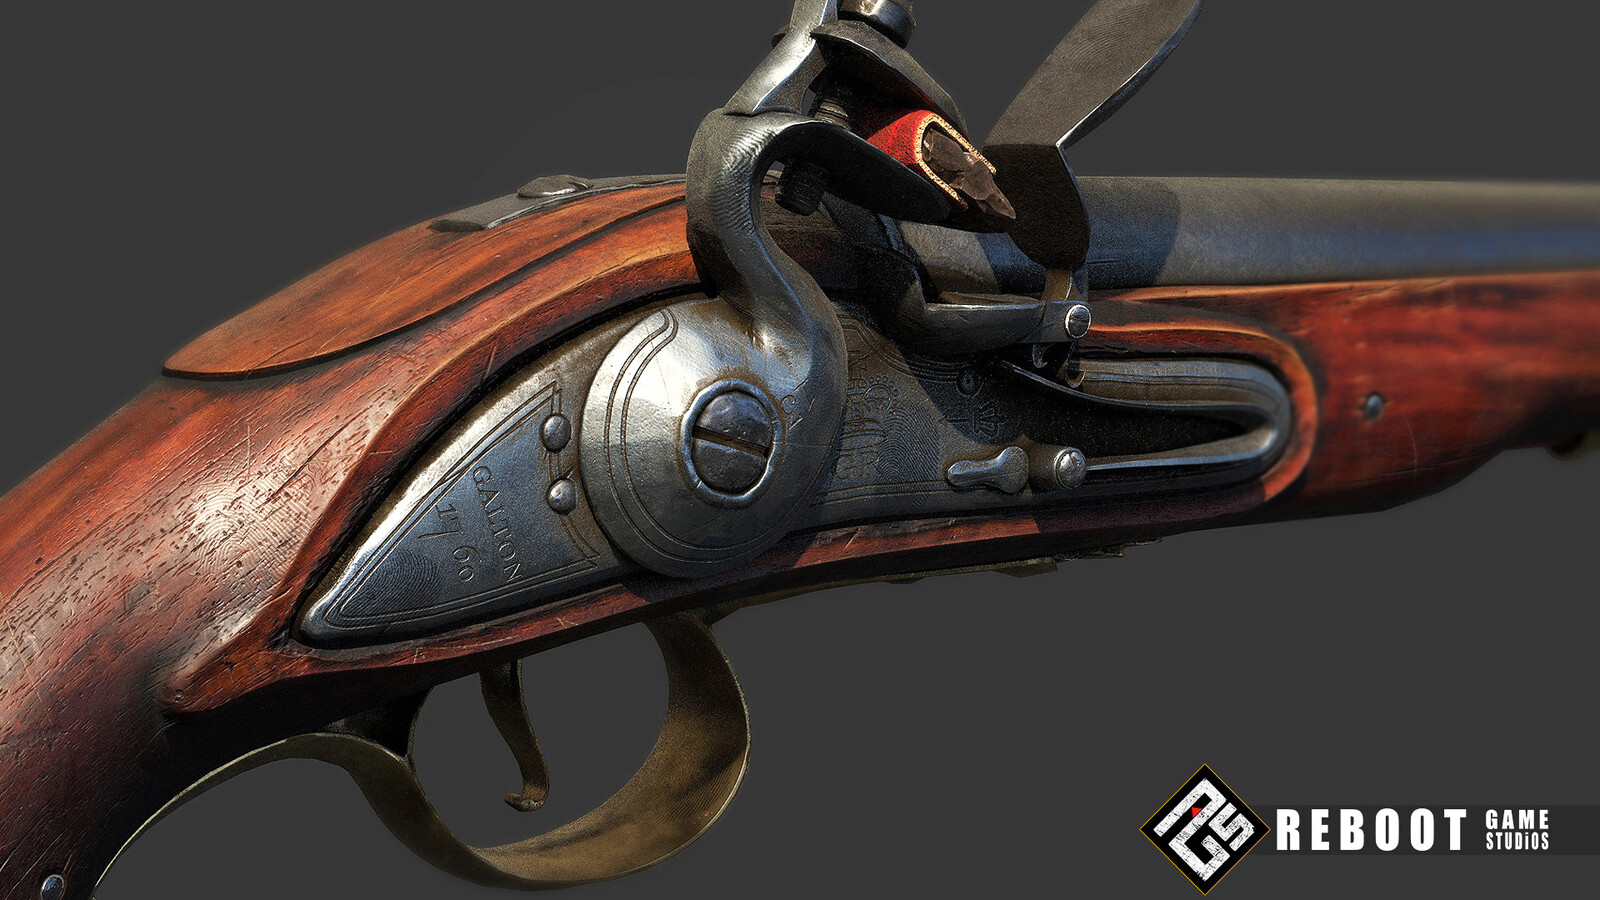 17th century weapons artwork done by Reboot team for a client                            - Used with permission.